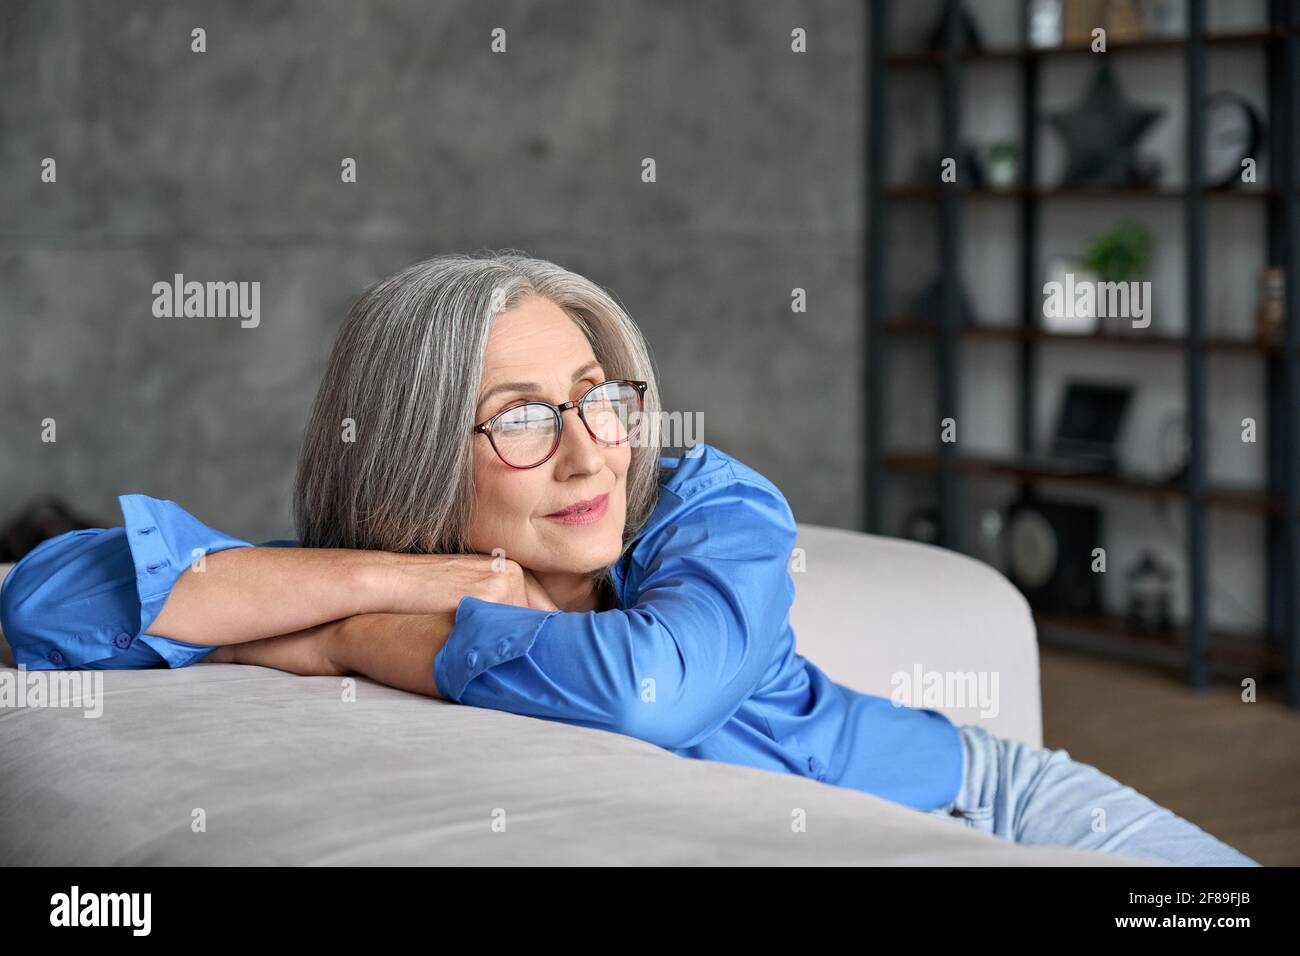 Senior mid age woman looking in window enjoying wellbeing and future vision. Stock Photo